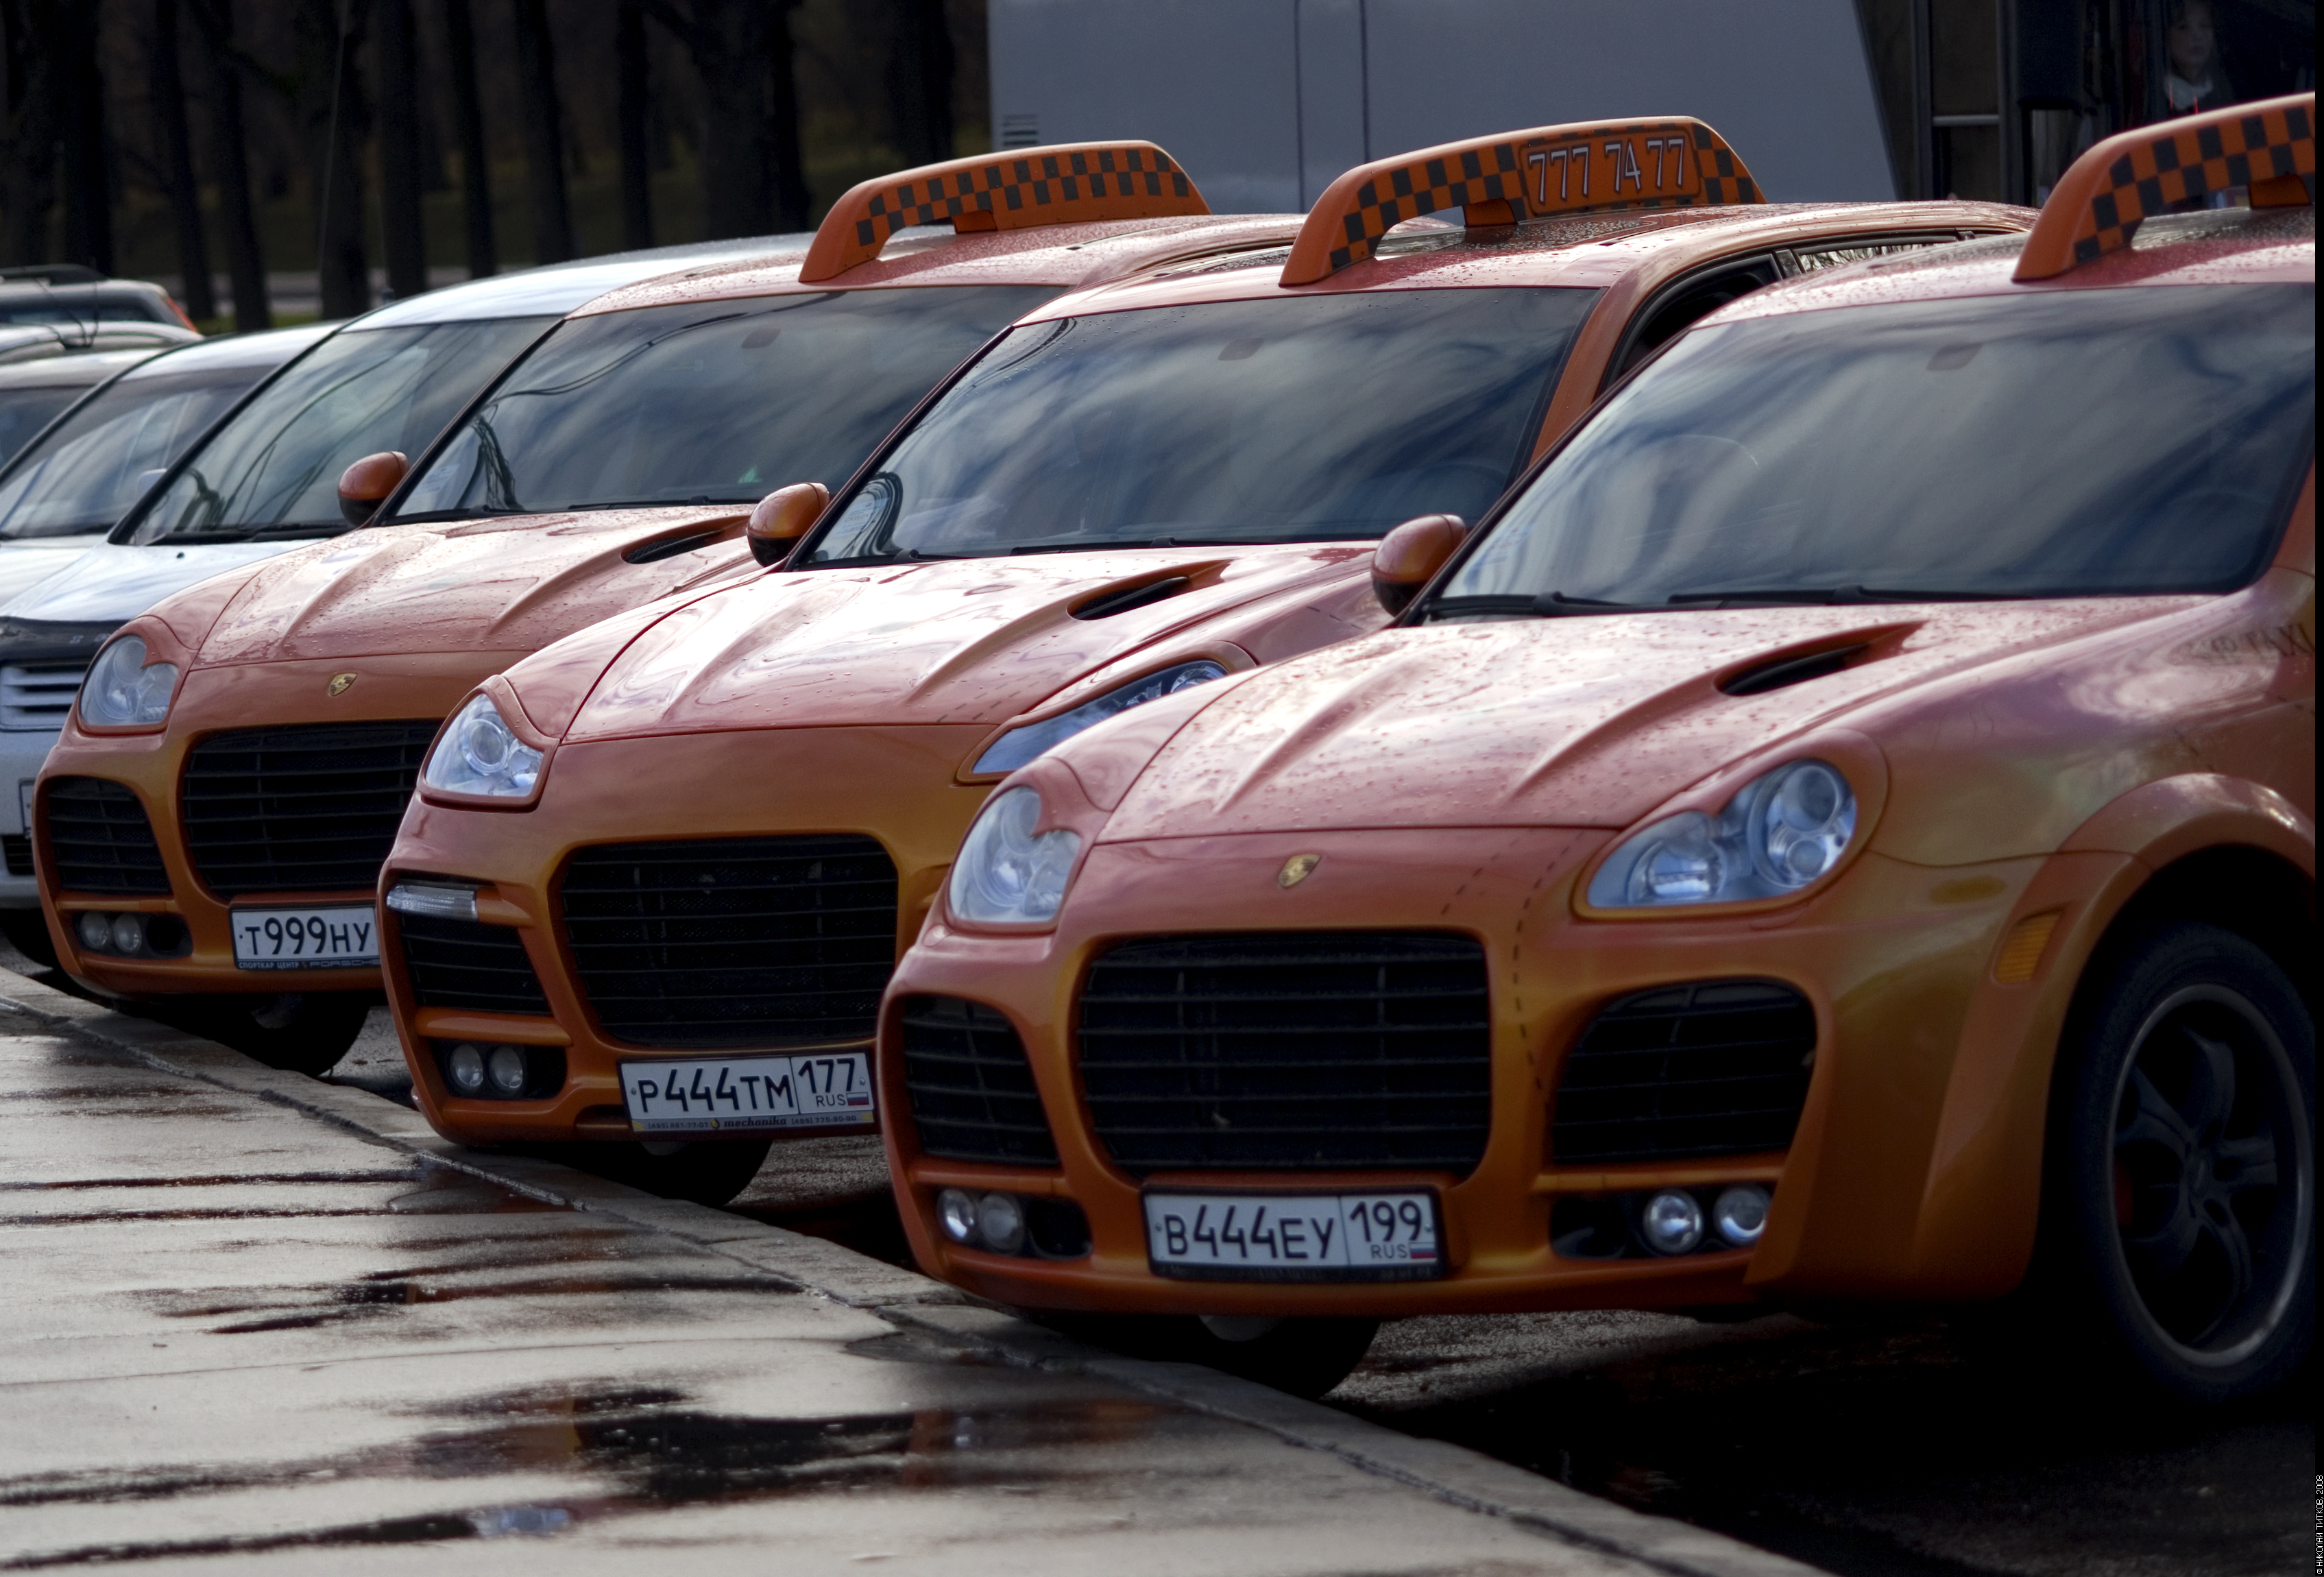 10 best taxis in cities around the world. | CNN Travel